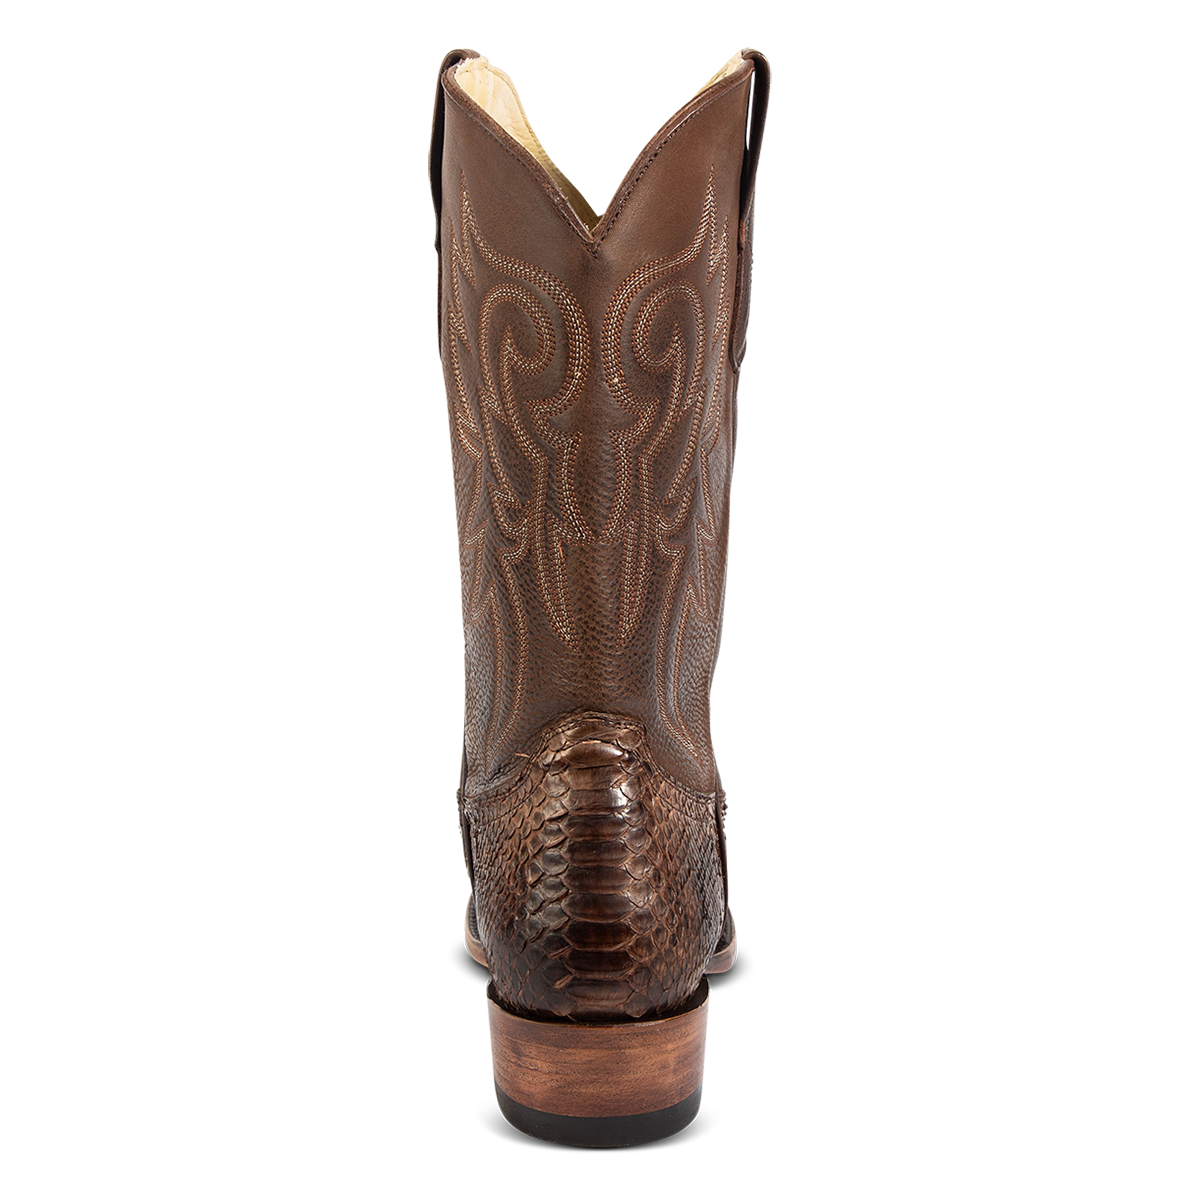 Back view showing FREEBIRD men's Marshall brown python leather western cowboy boot with shaft stitch detailing, snip toe construction and leather pull straps